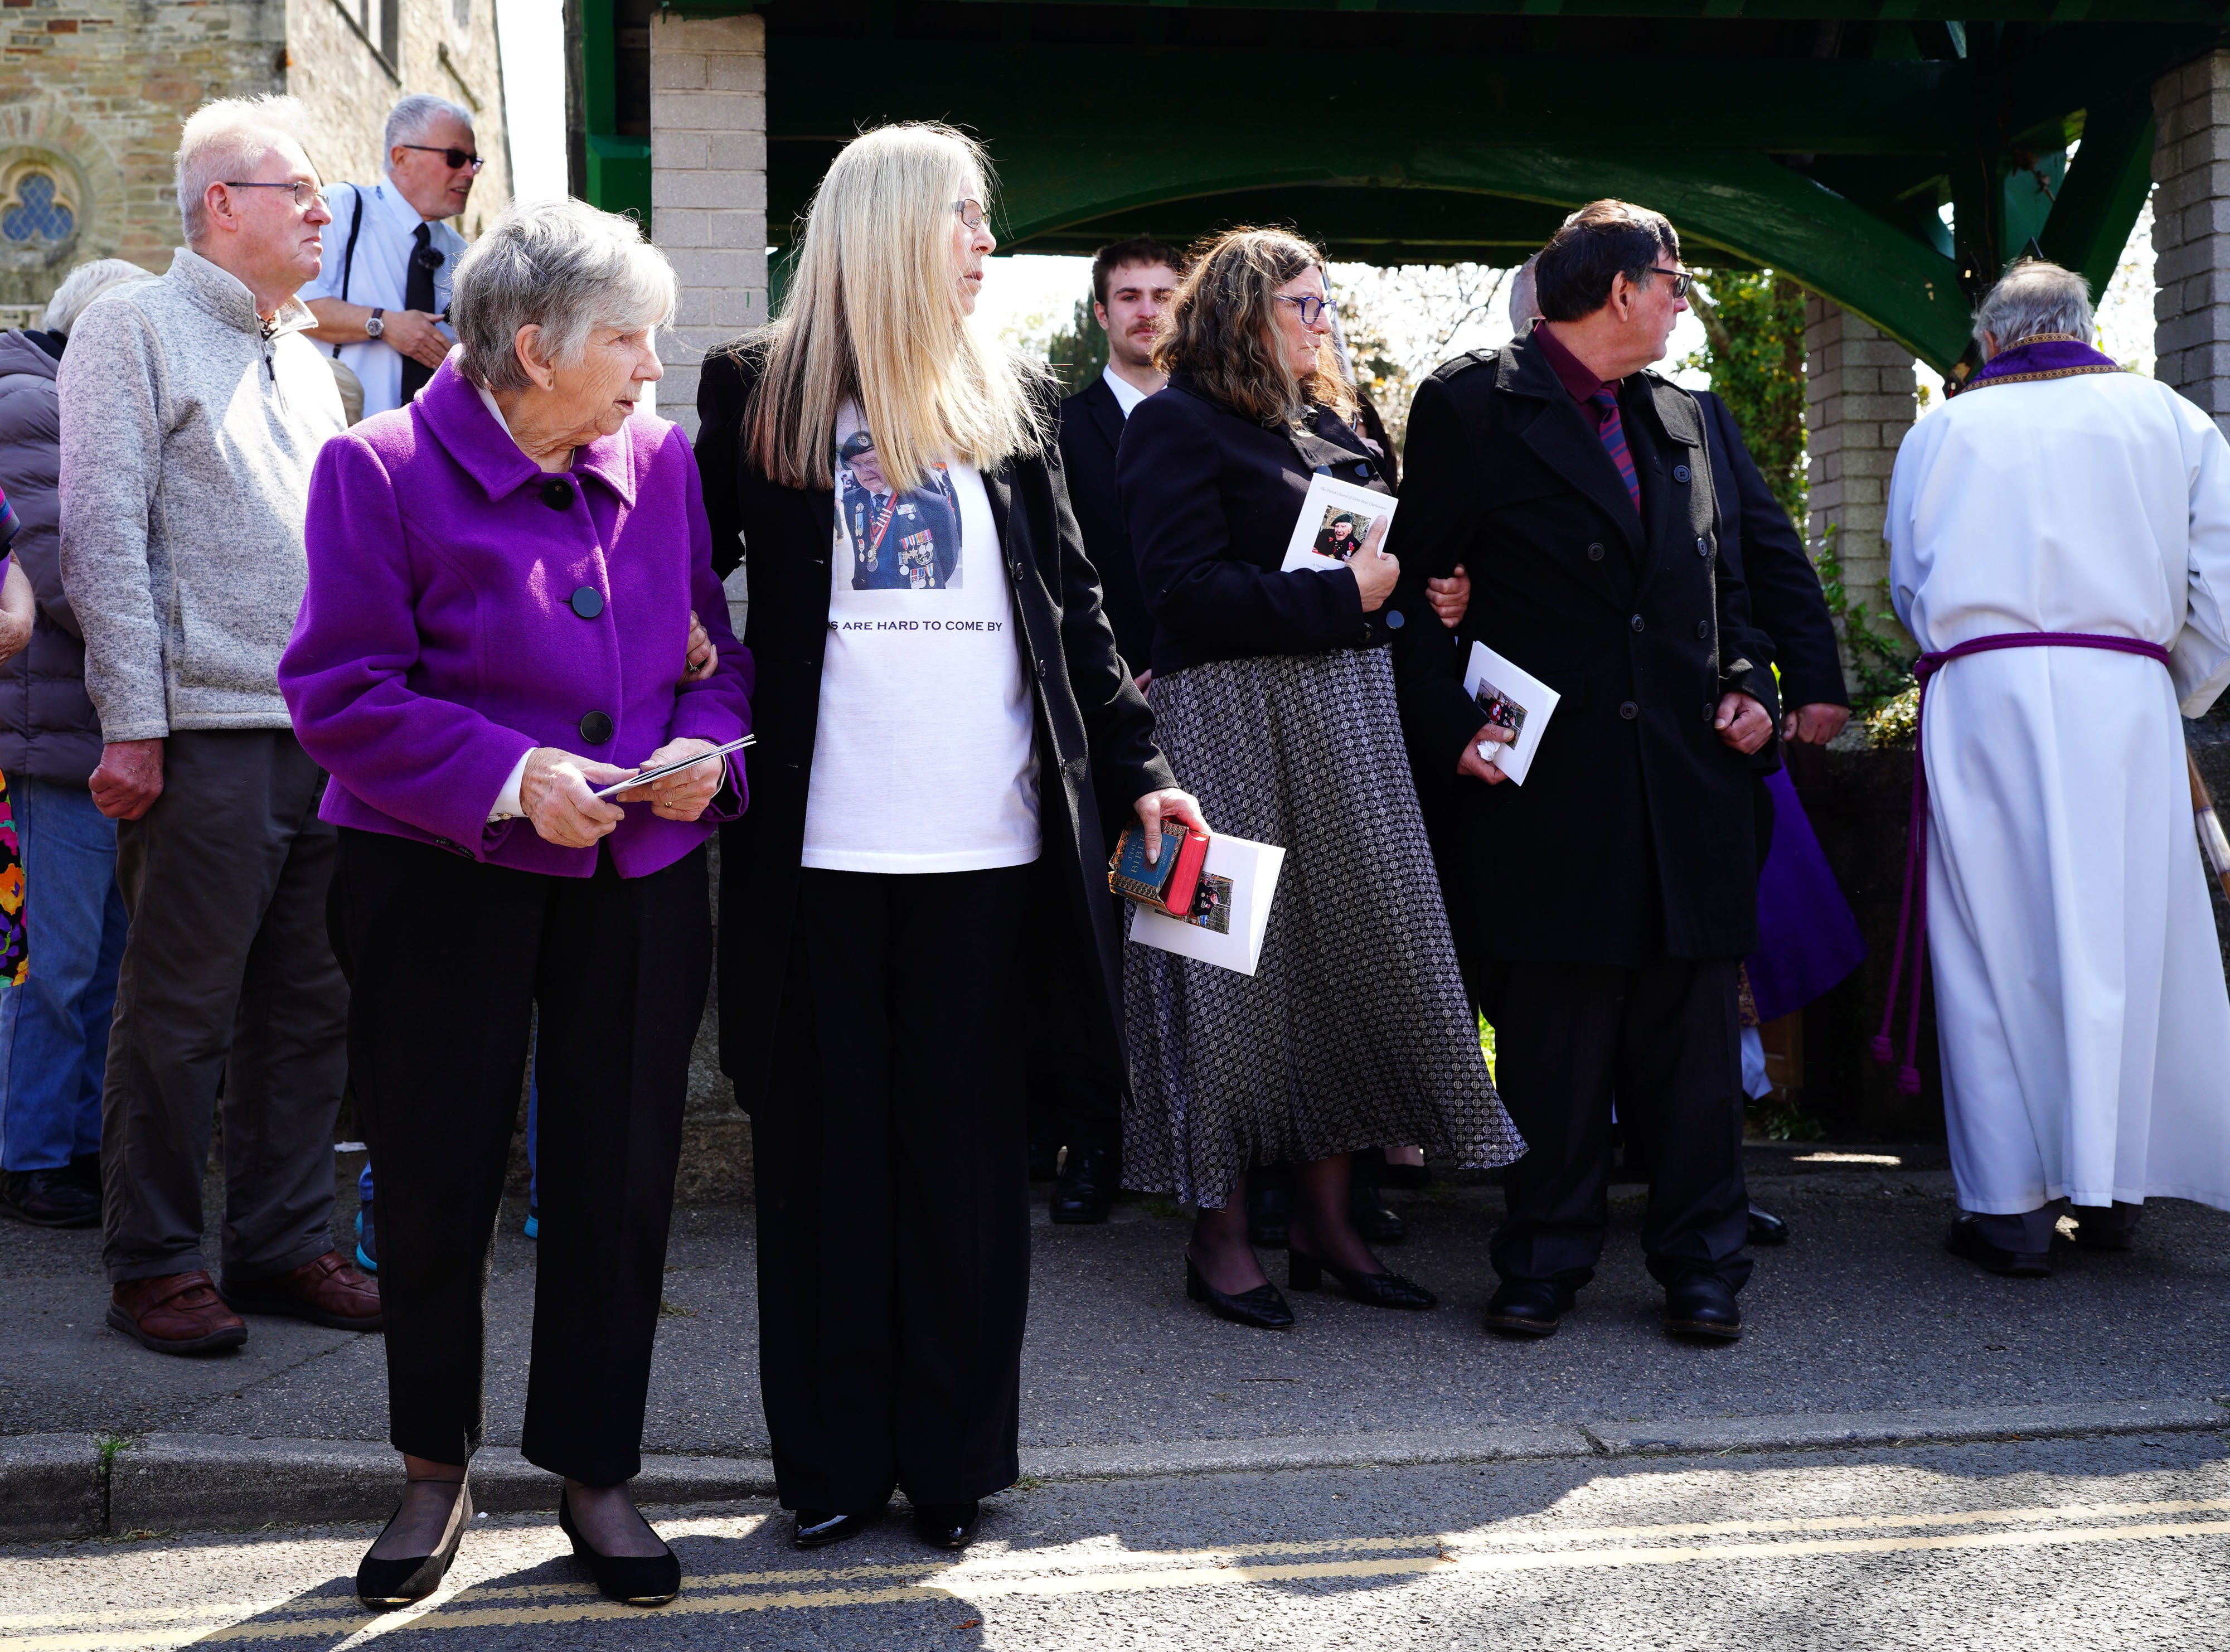 Mr Billinge’s family after for the funeral service for the 96-year-old (Ben Birchall/PA)